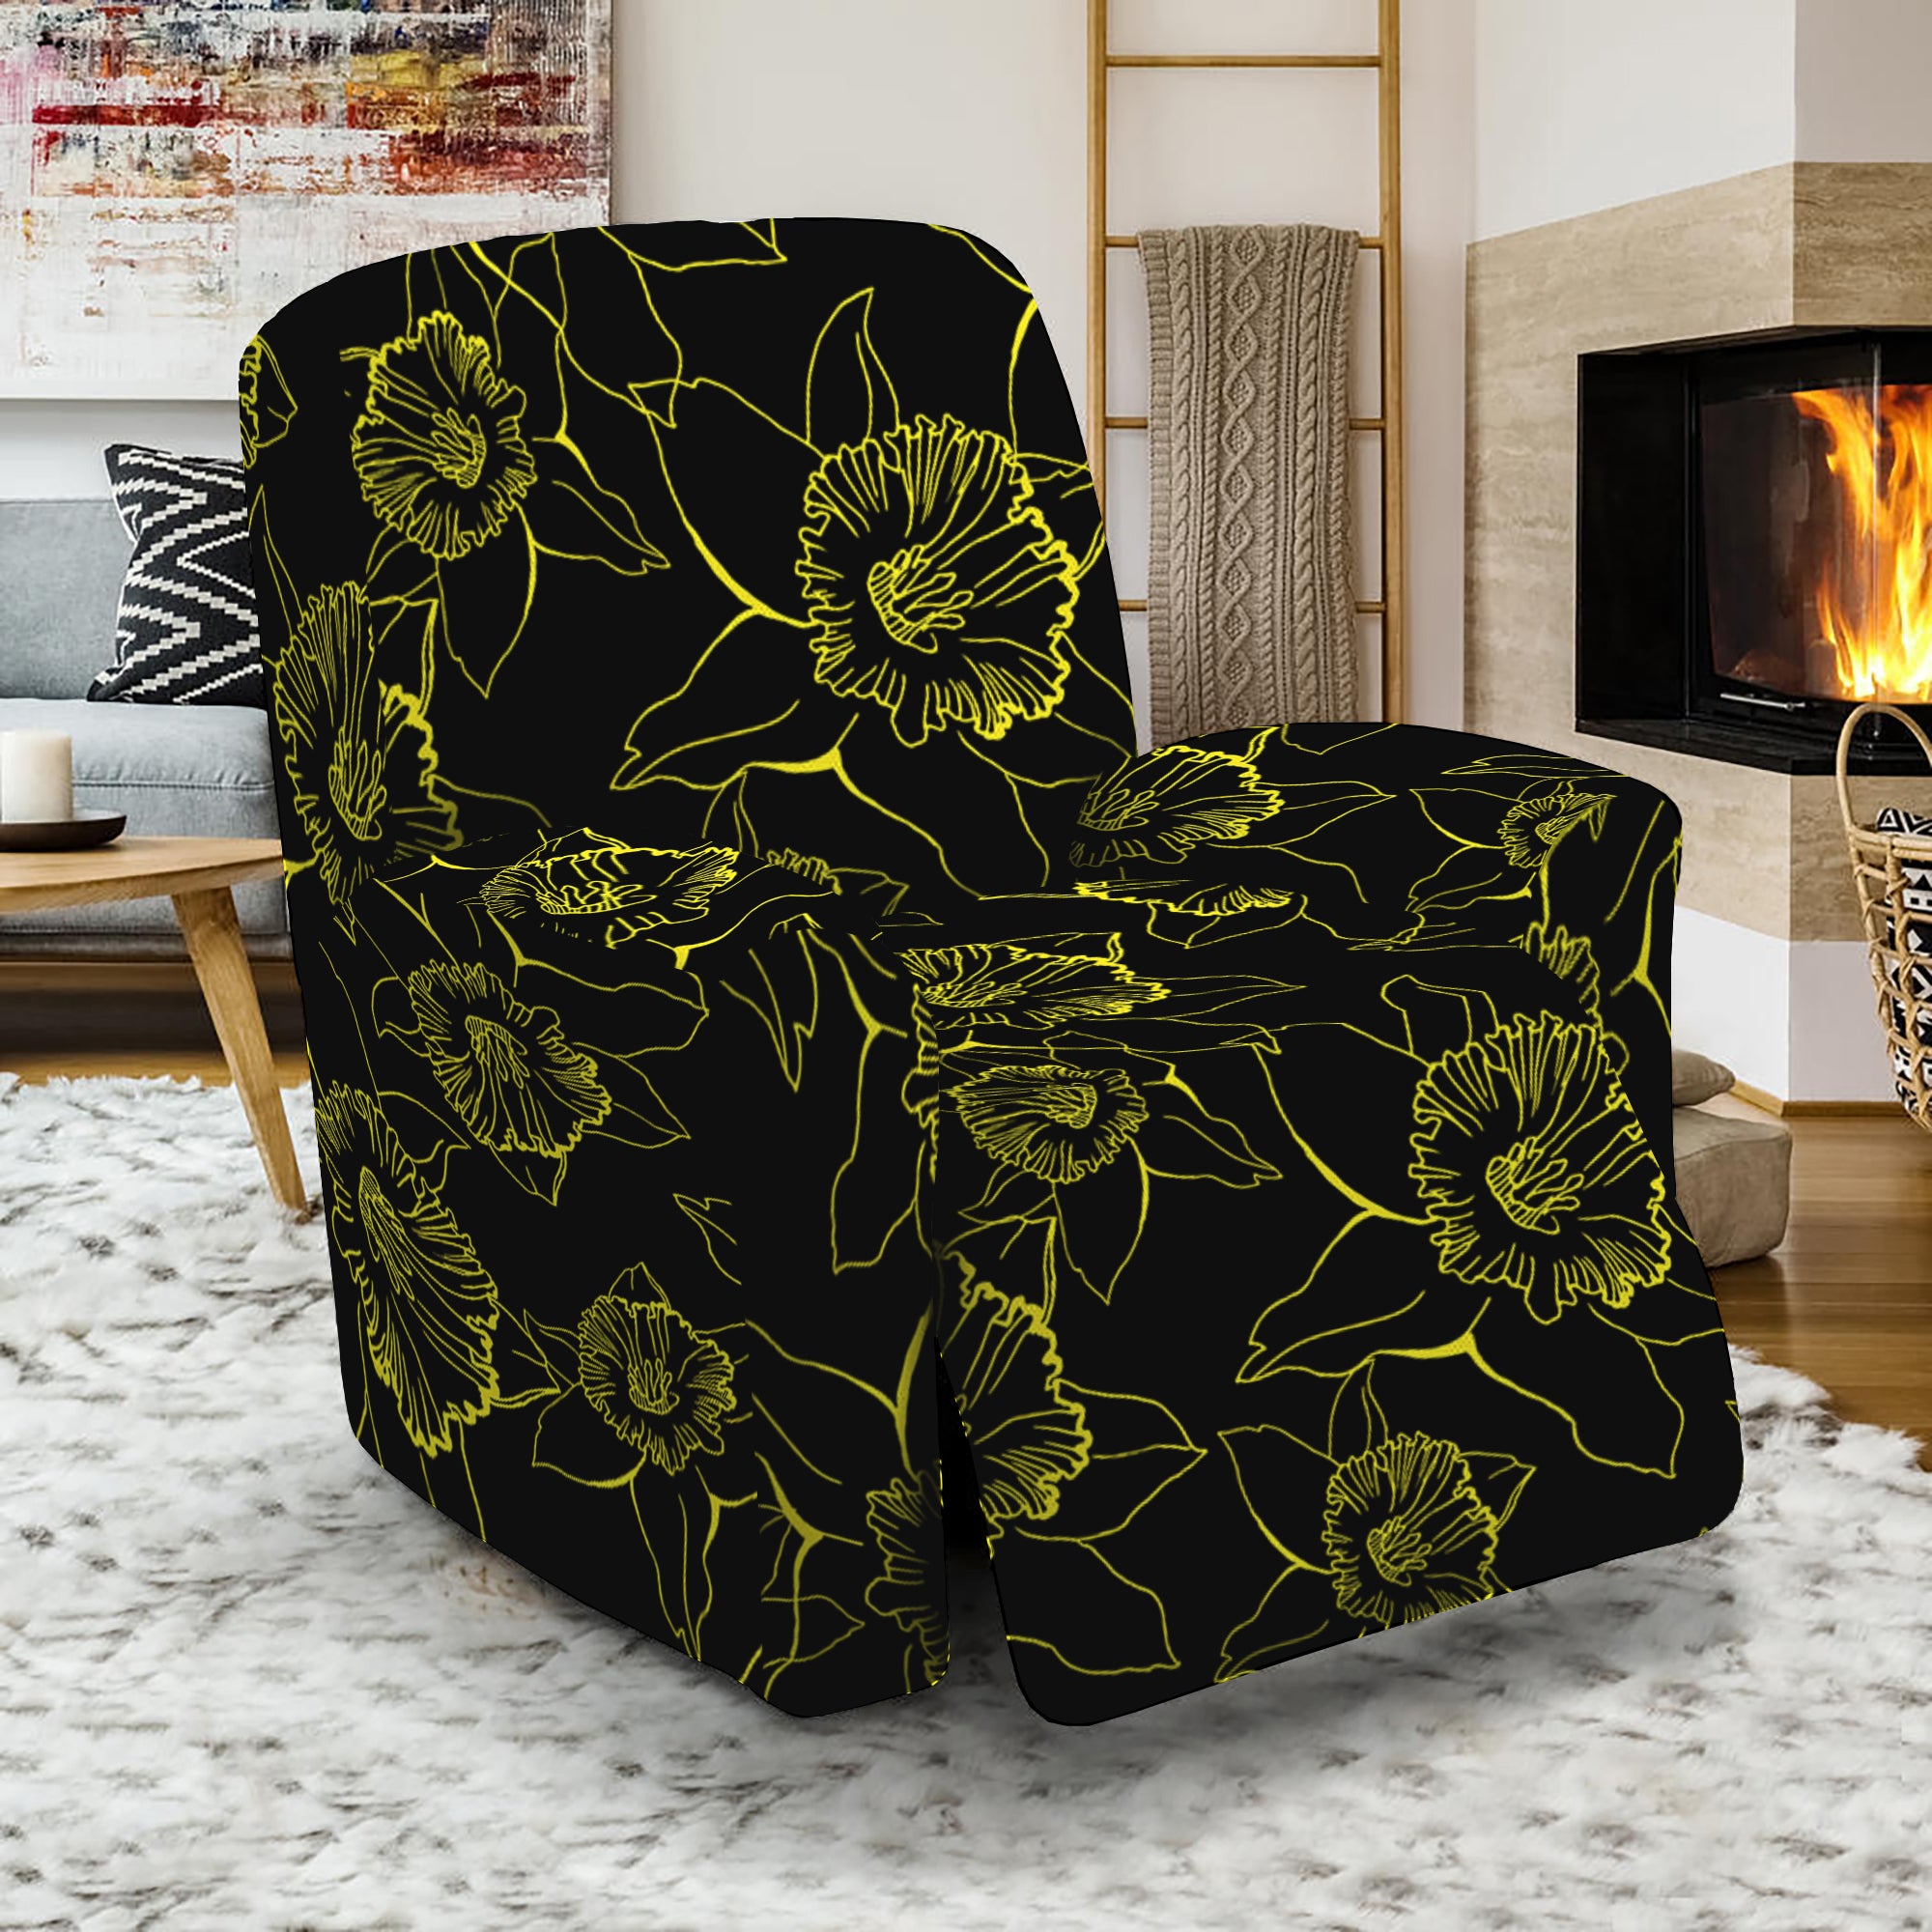 Black And Yellow Daffodil Pattern Print Recliner Slipcover